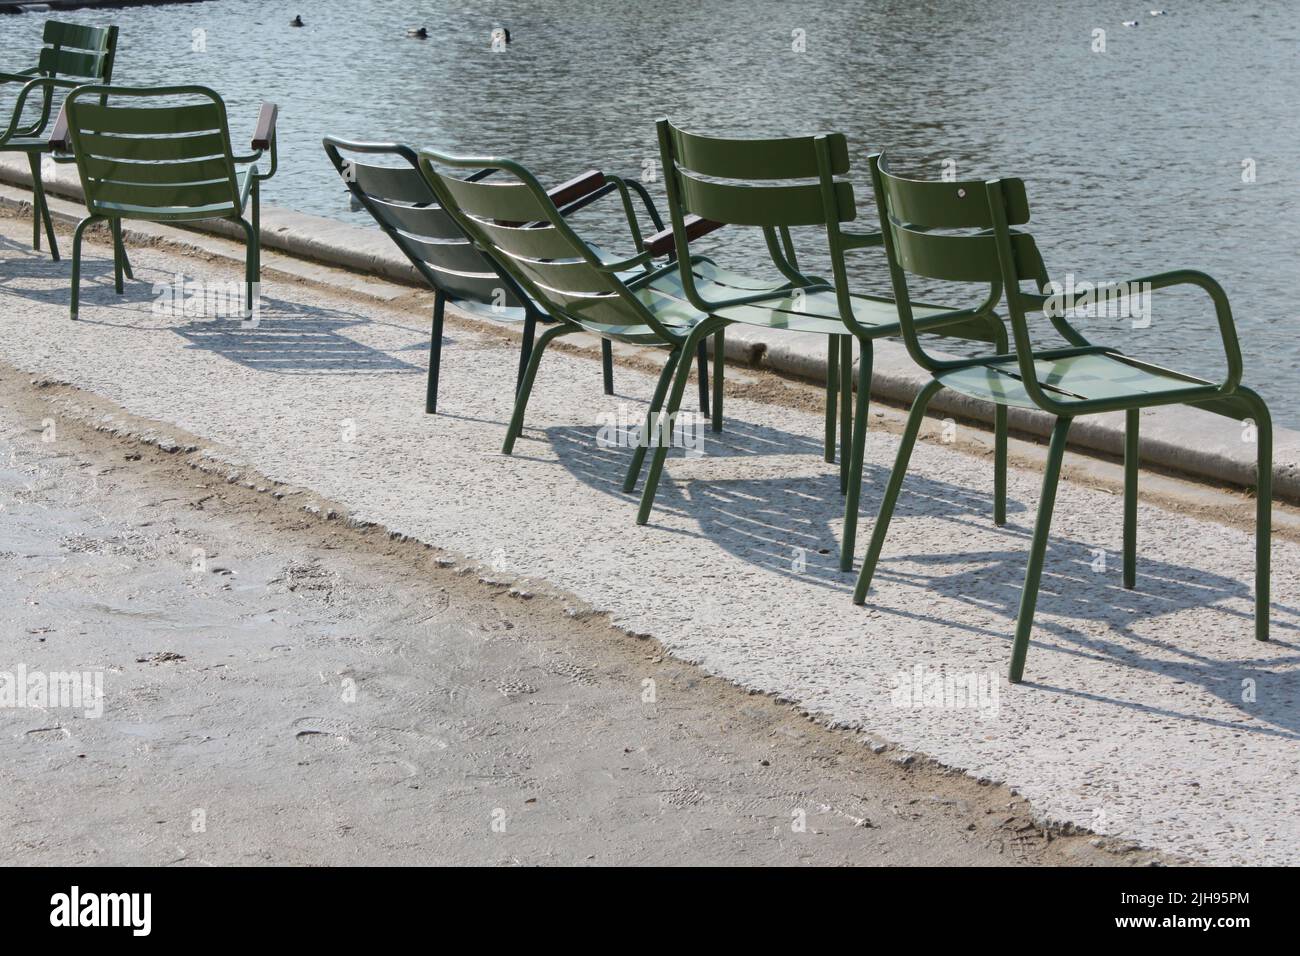 Green lawn chairs in Luxembourg Garden in Paris, France around a pool. Stock Photo